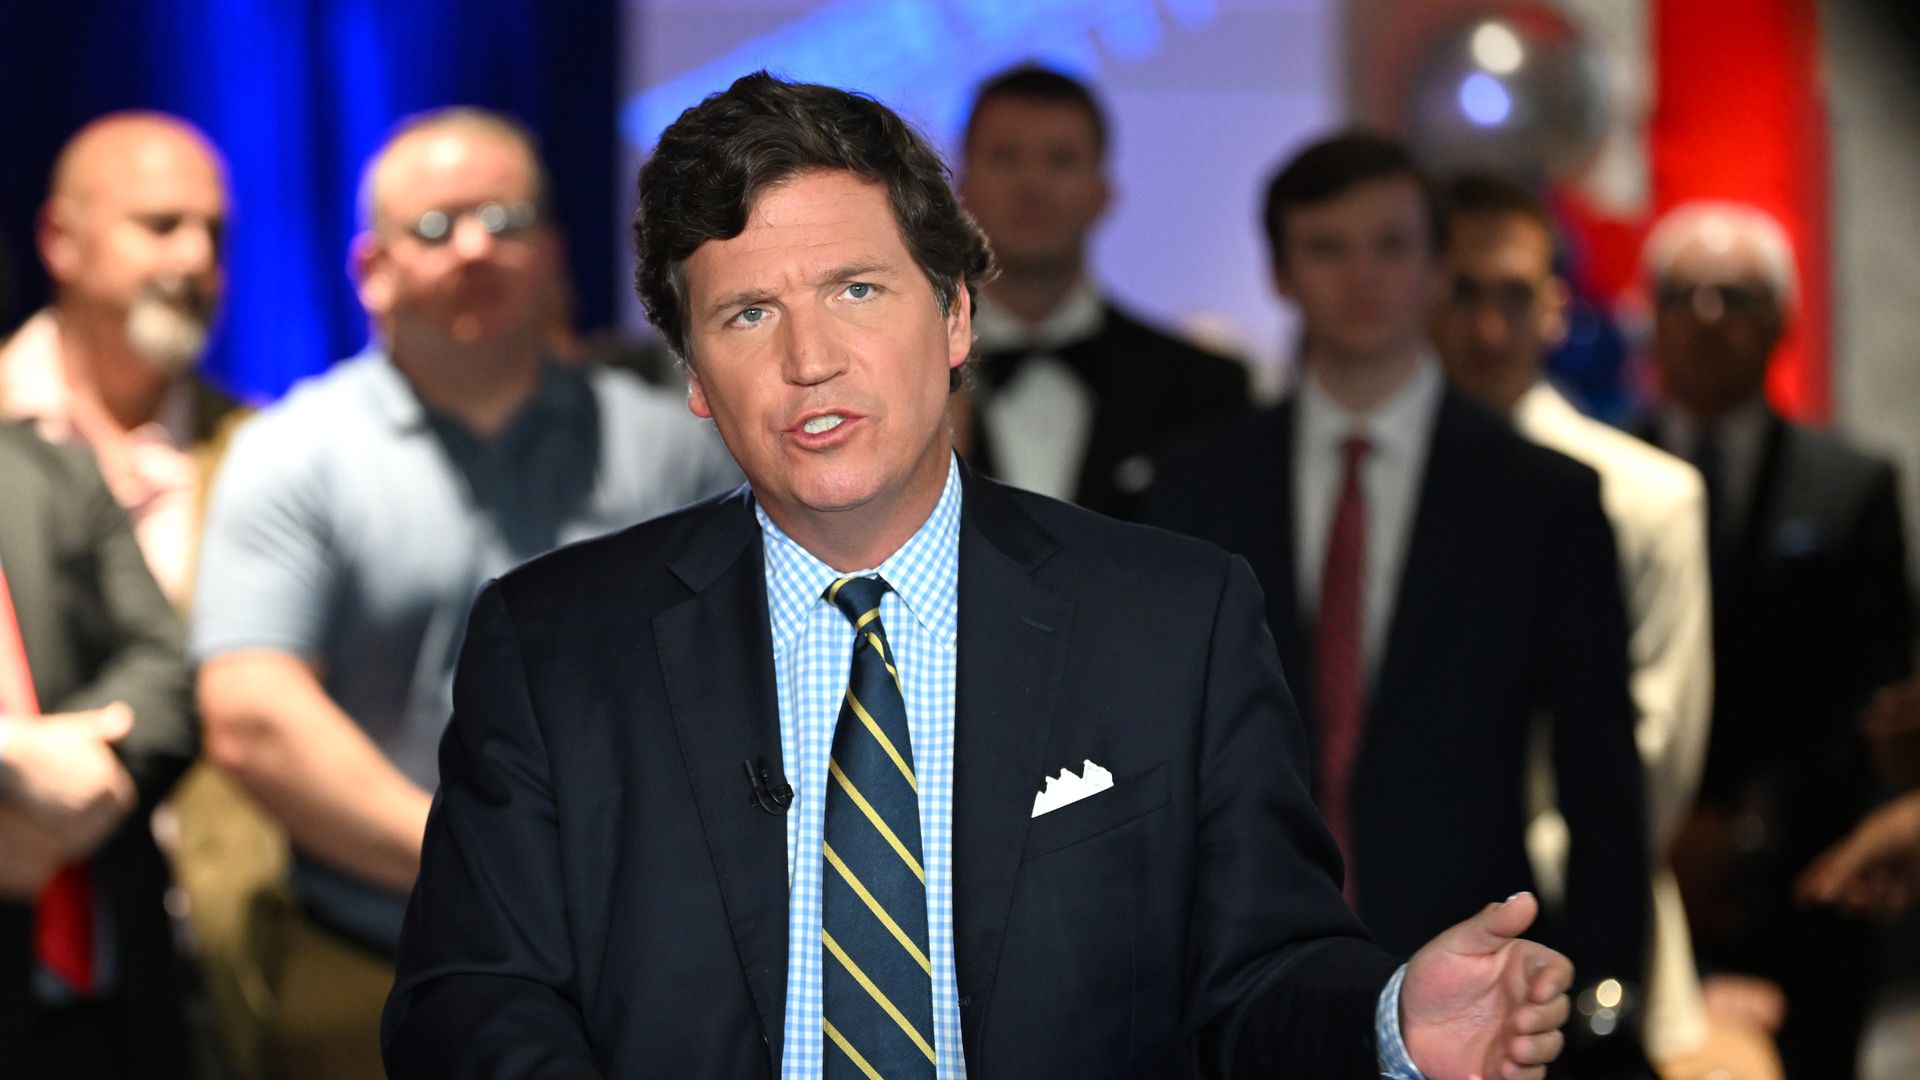 Fox News says Tucker Carlson breached his contract – and threatens to sue (axios.com)